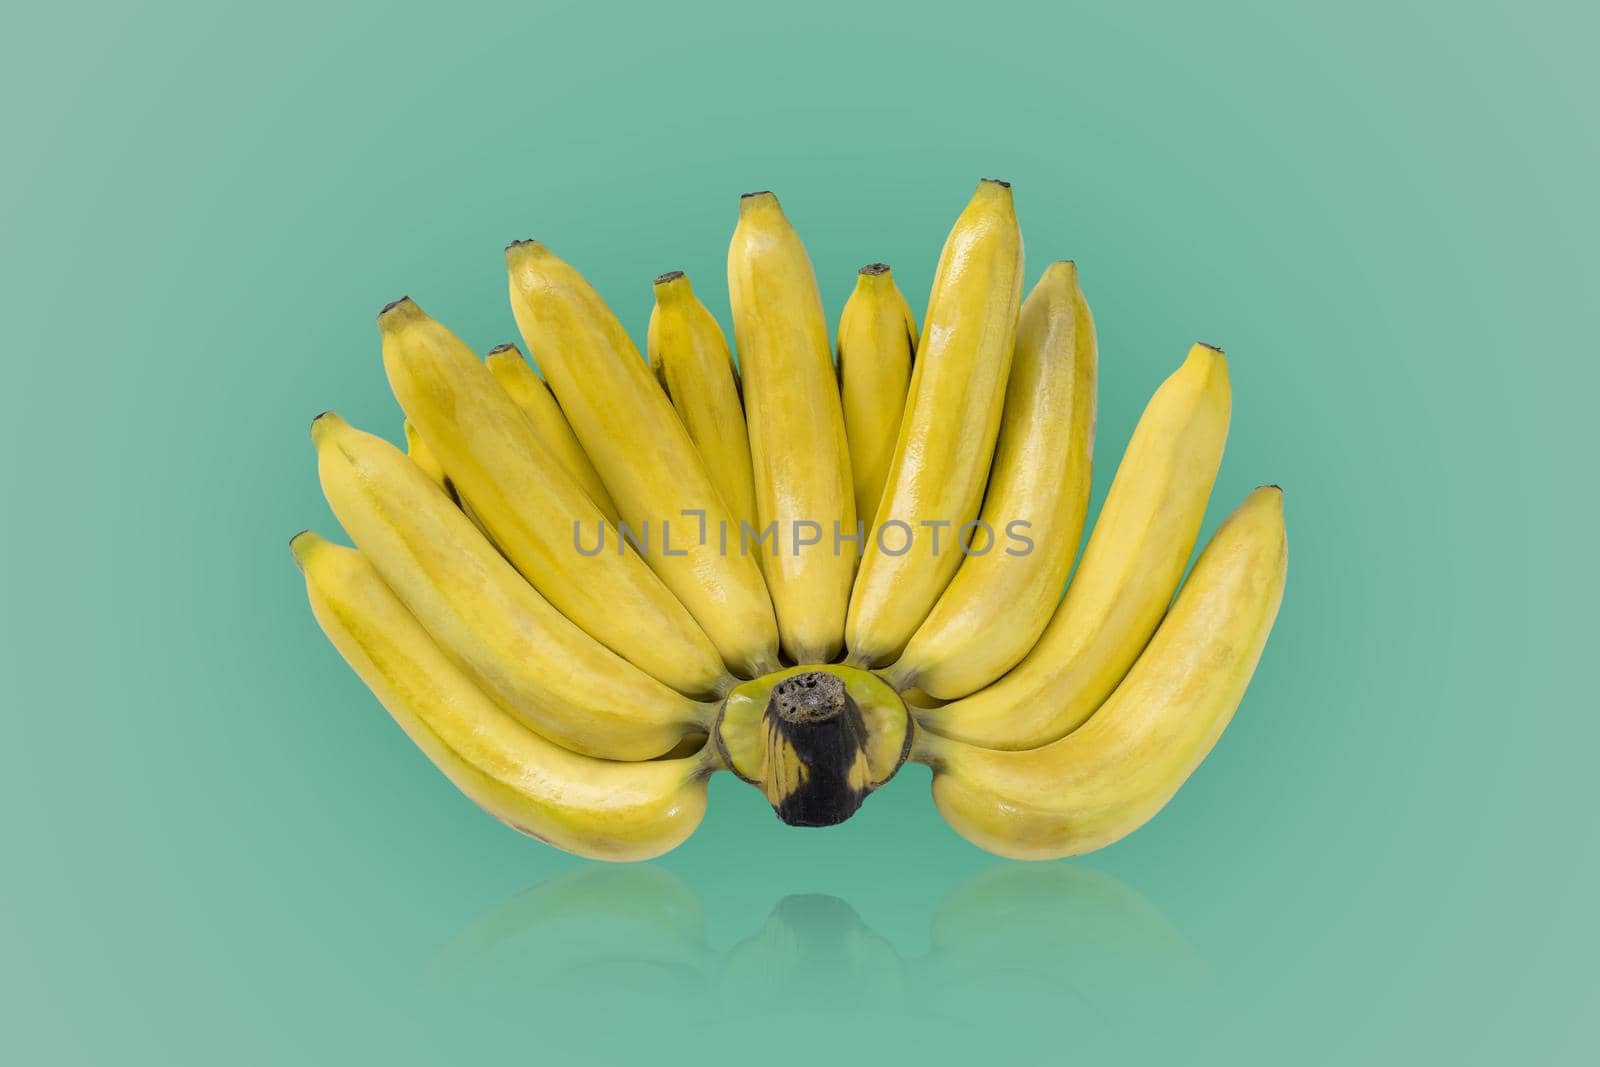 Group of yellow color ripe bananas  isolated on green colors background.